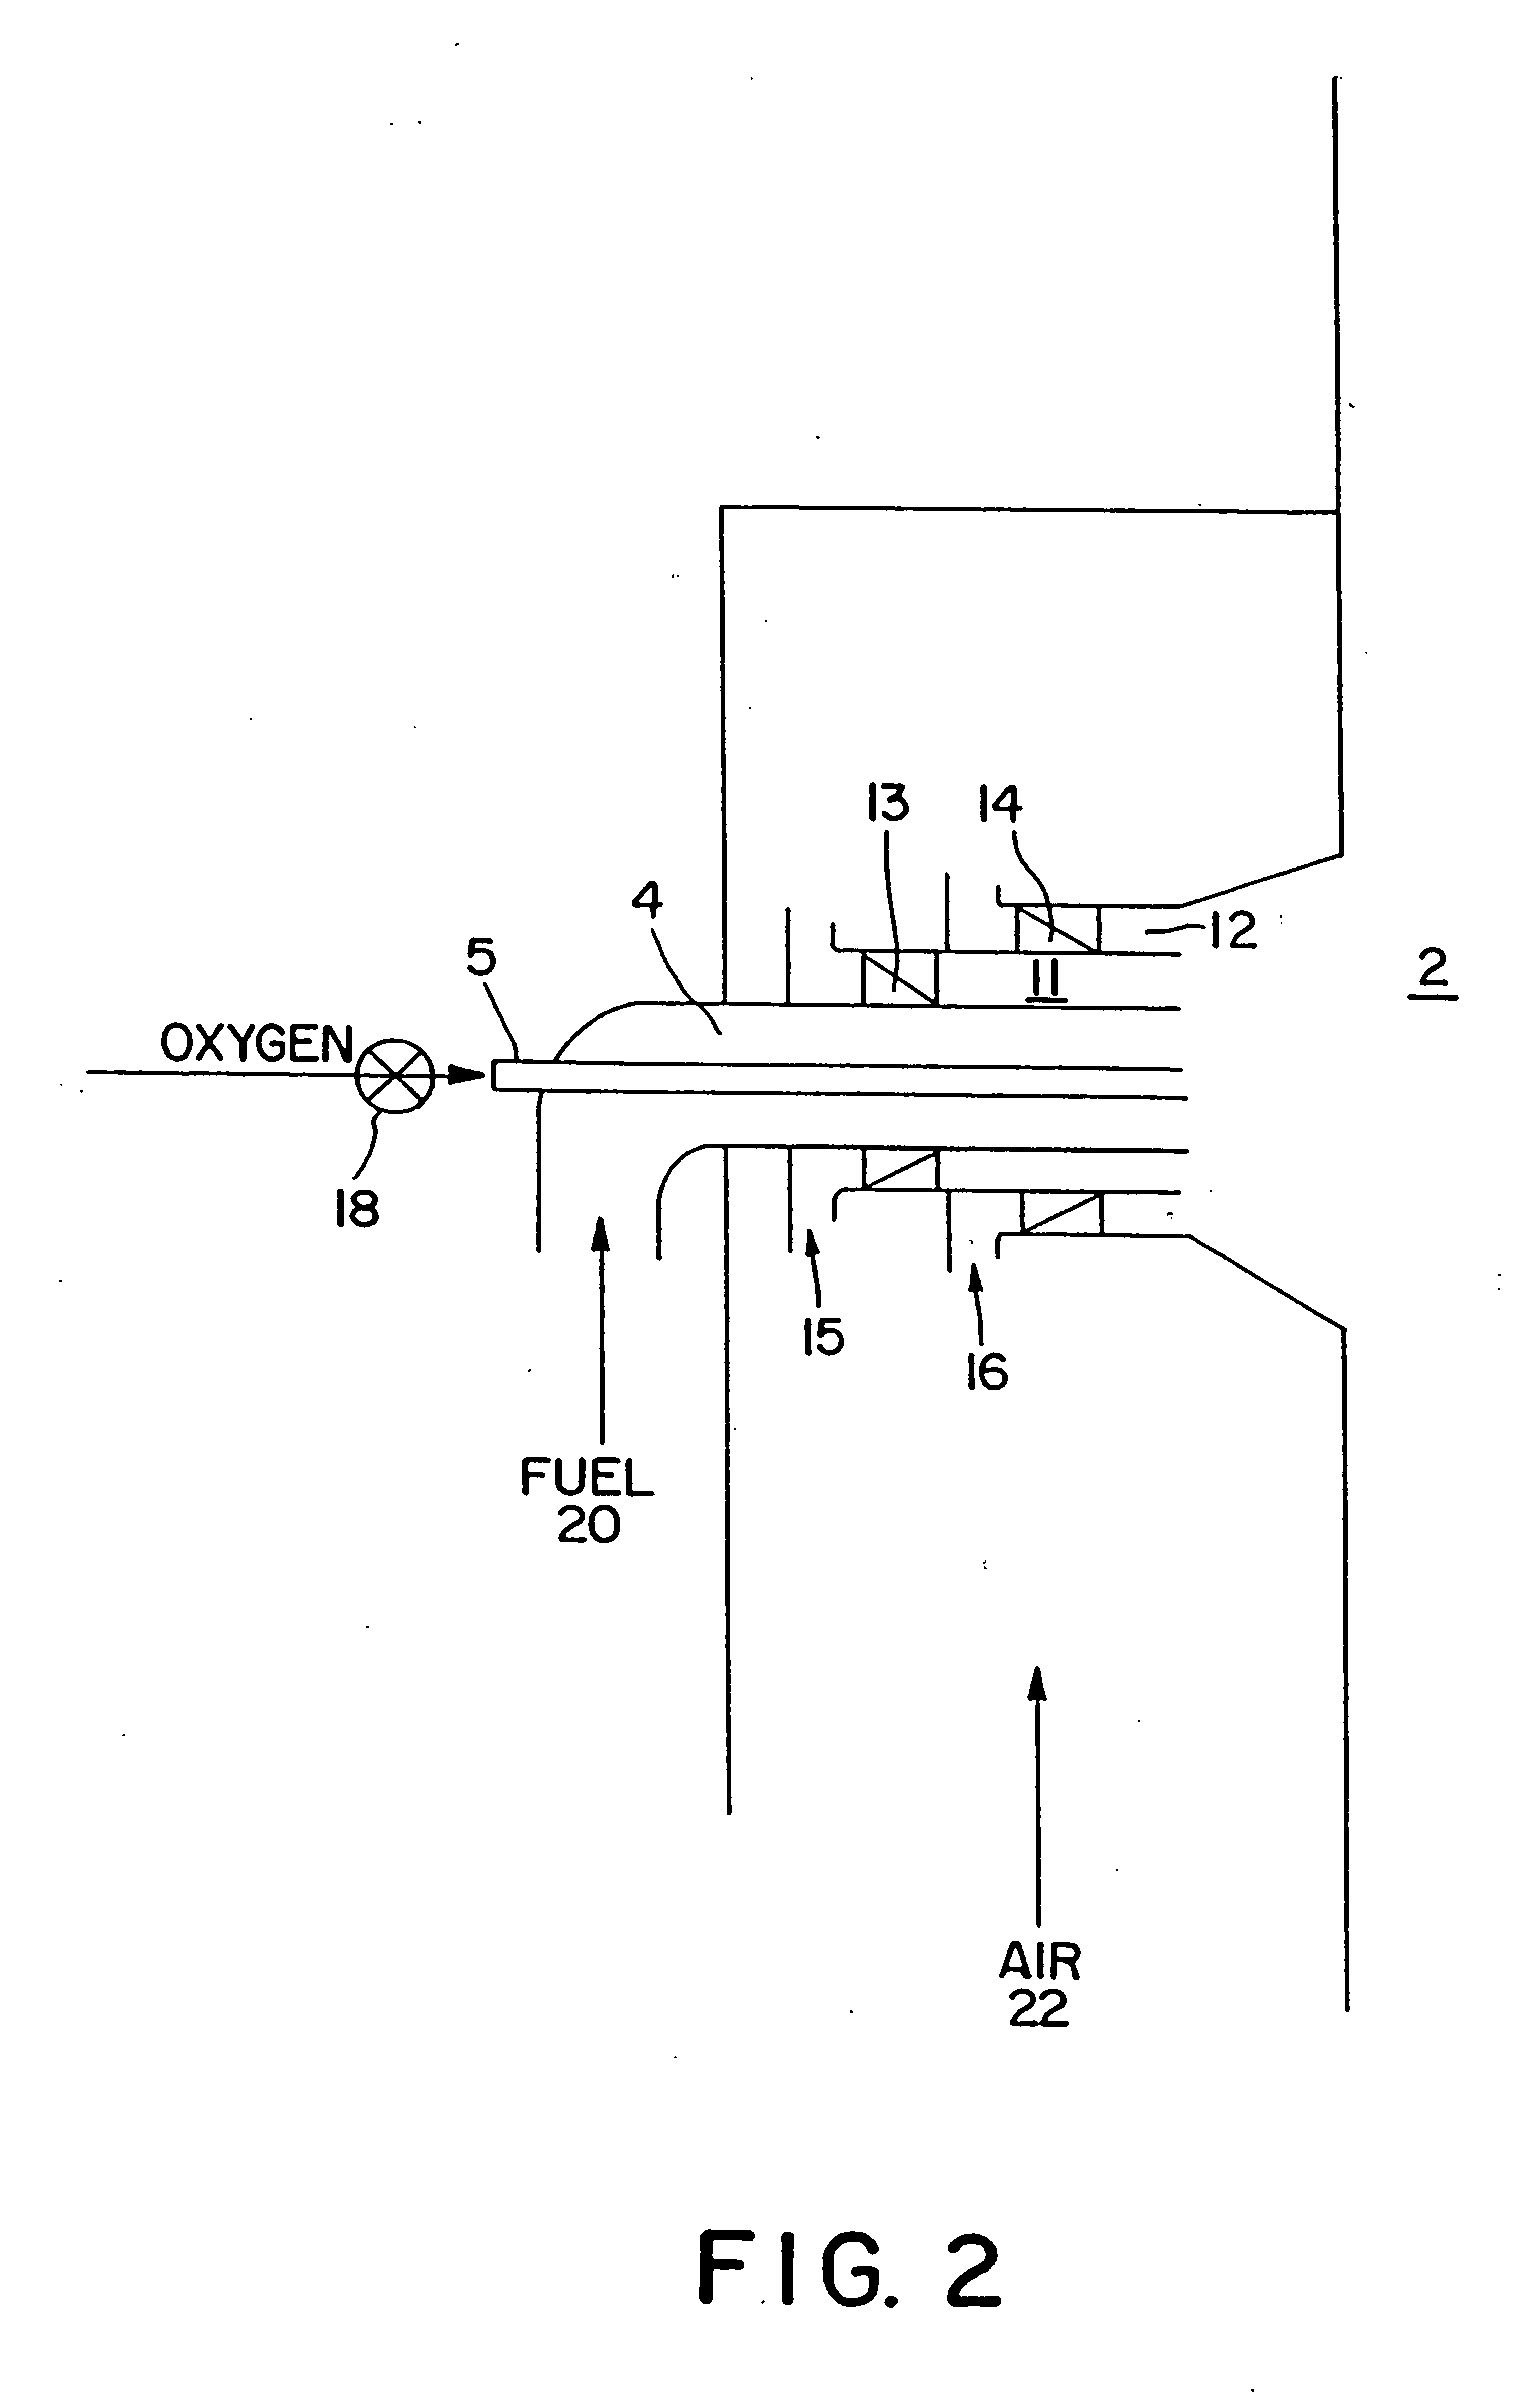 Method of operating furnace to reduce emissions